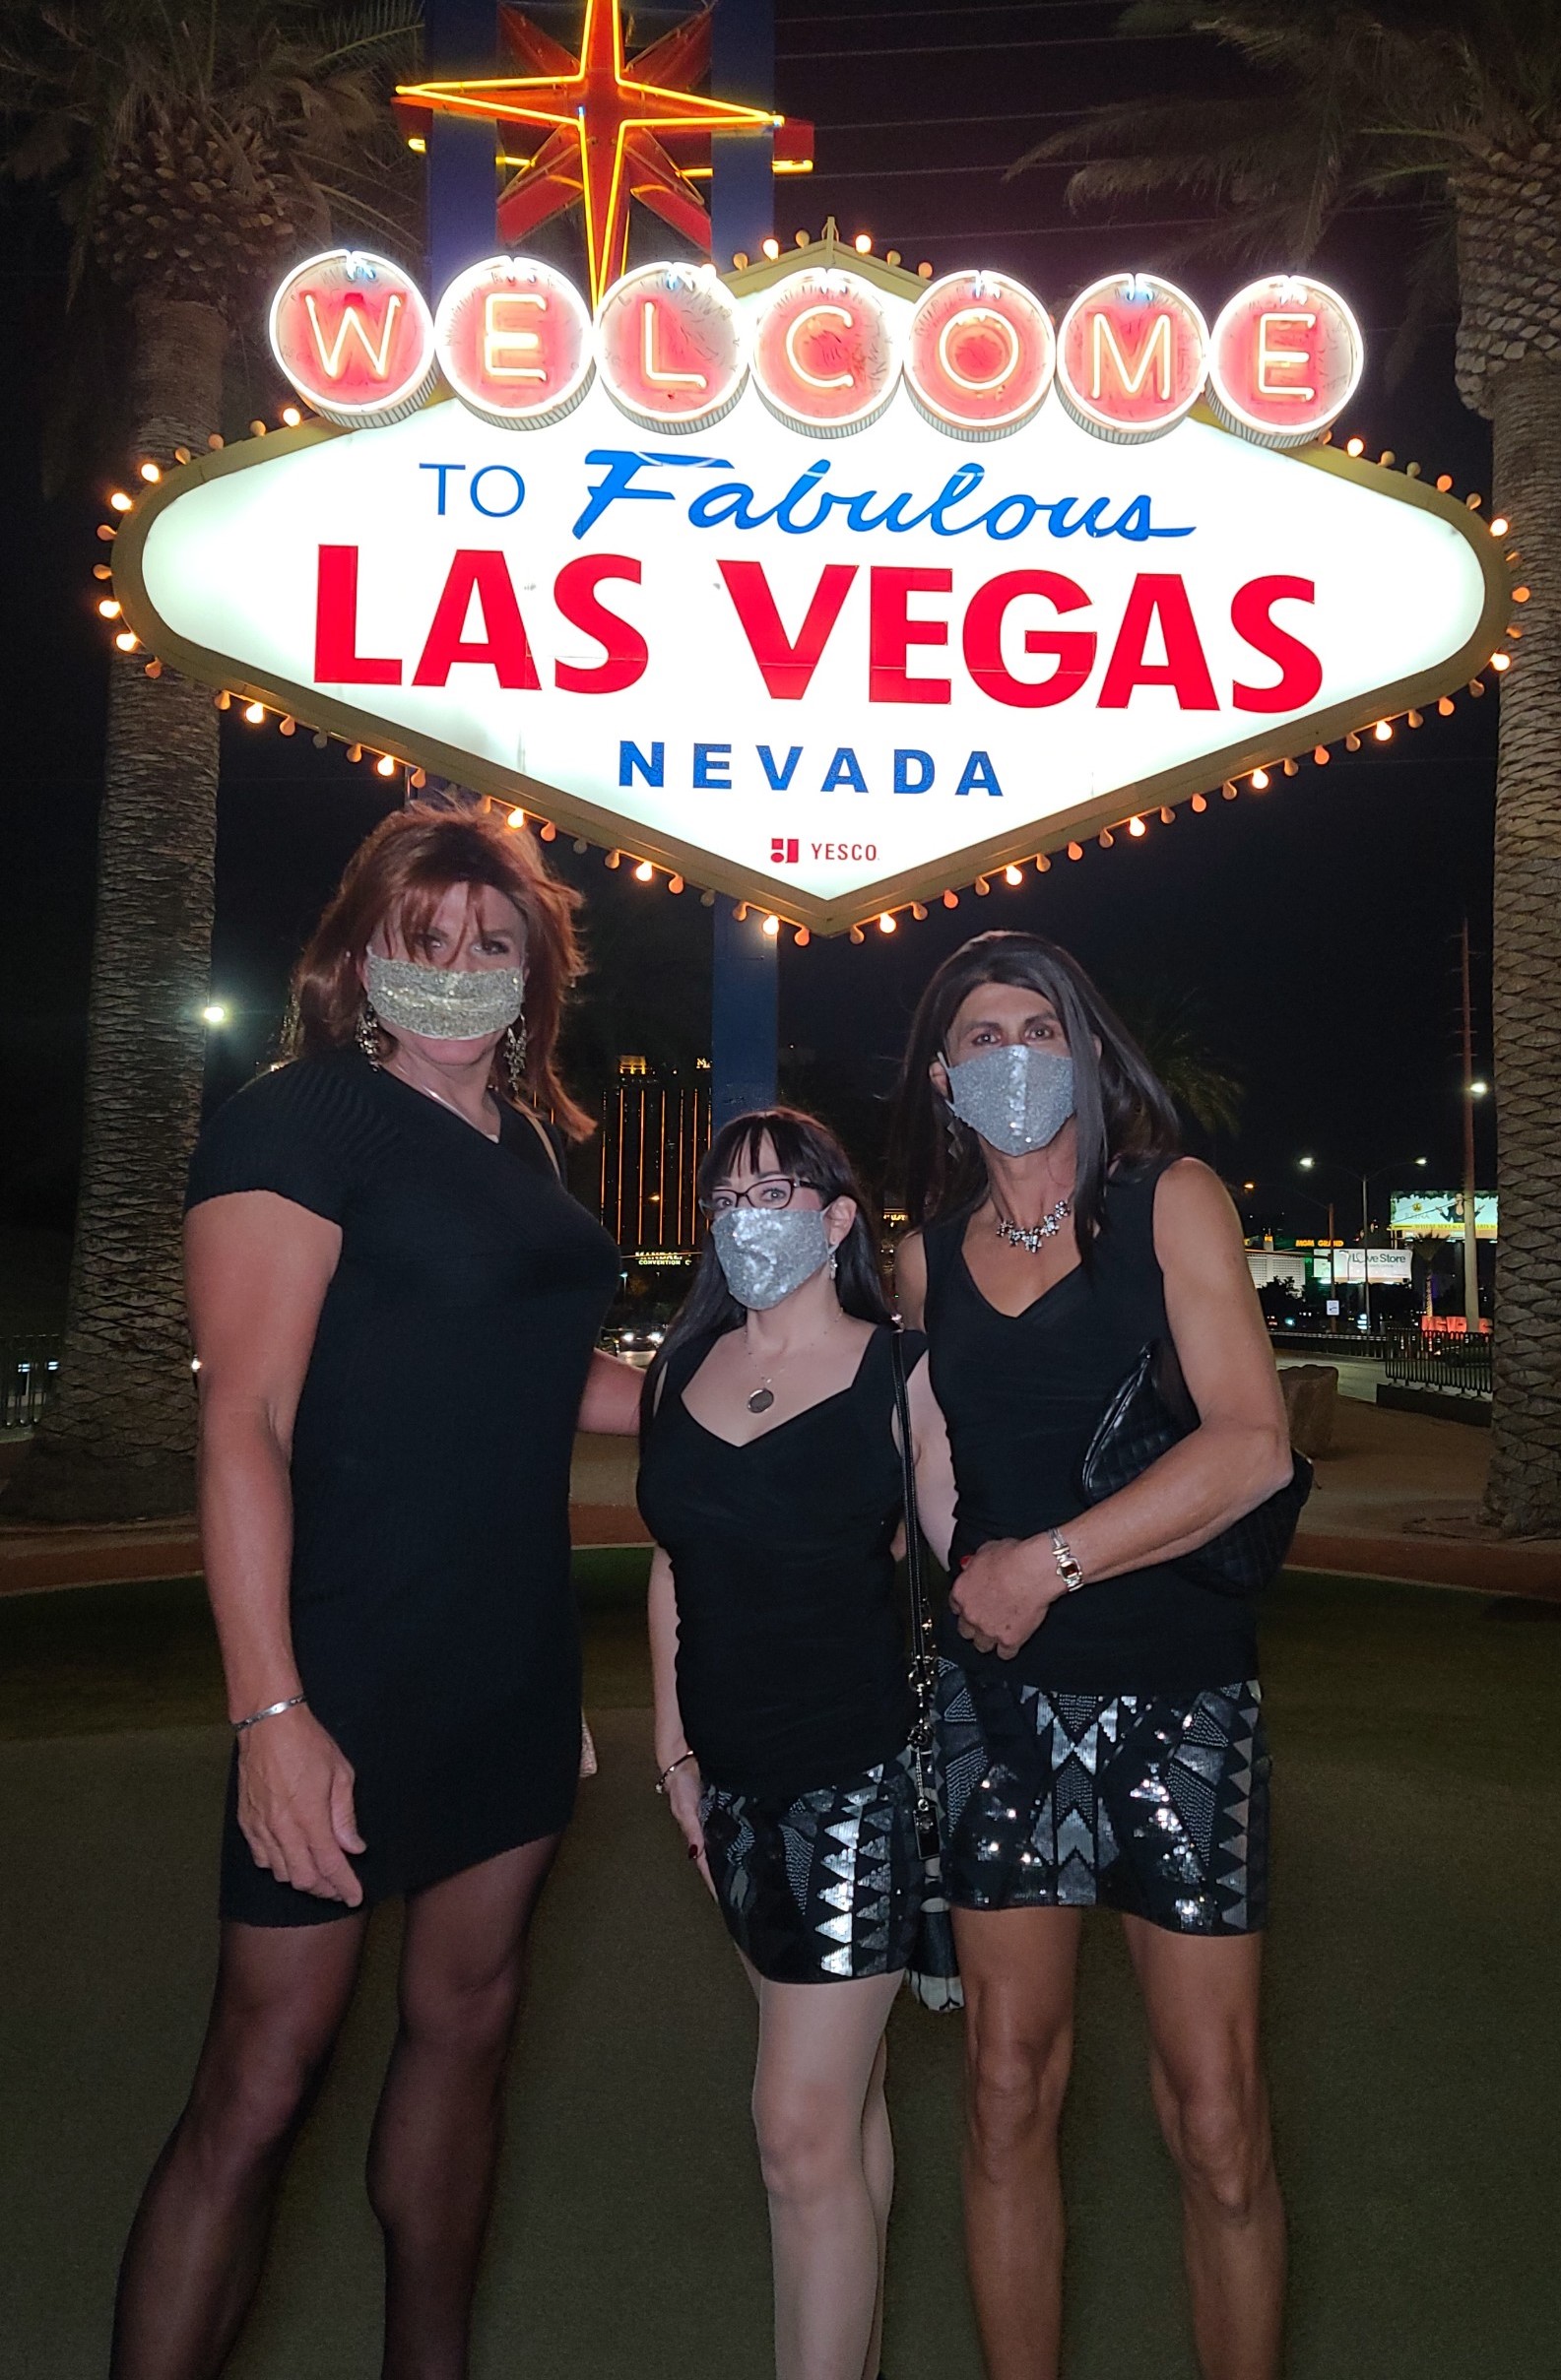 Three people in front of Las Vegas sign